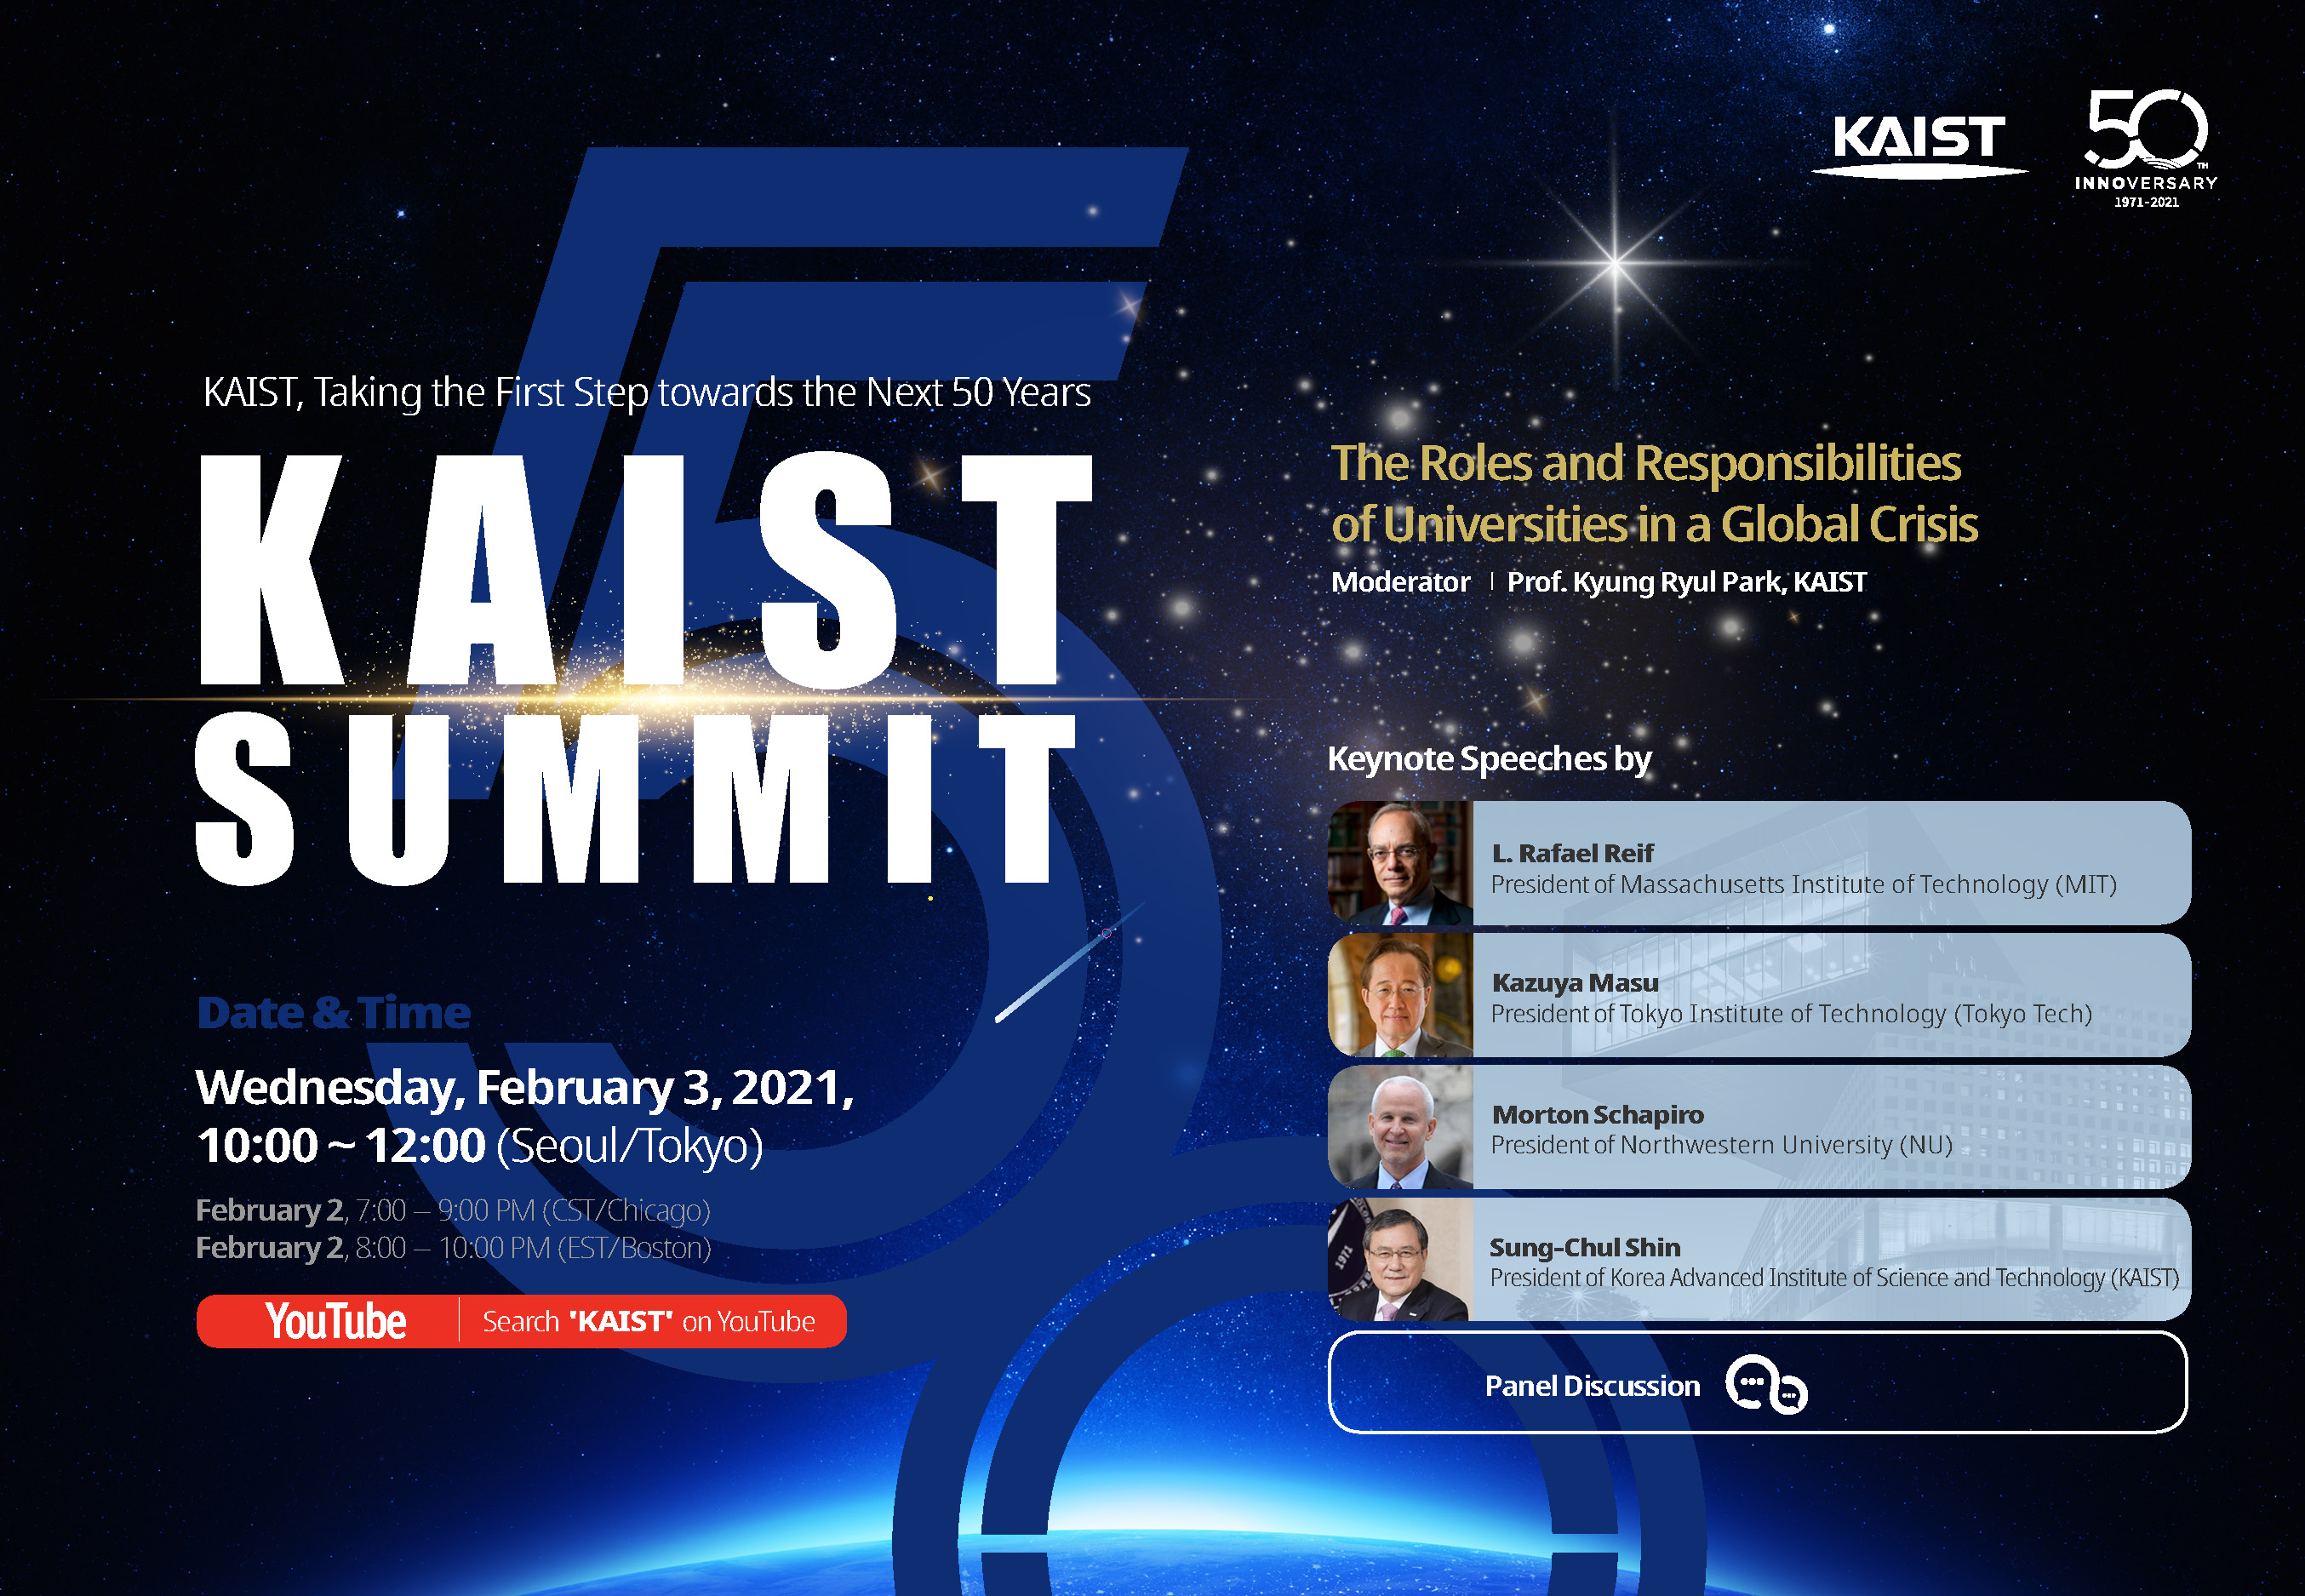 Top University Leaders Urge Innovation for the Post-COVID Era at the KAIST Summit 이미지